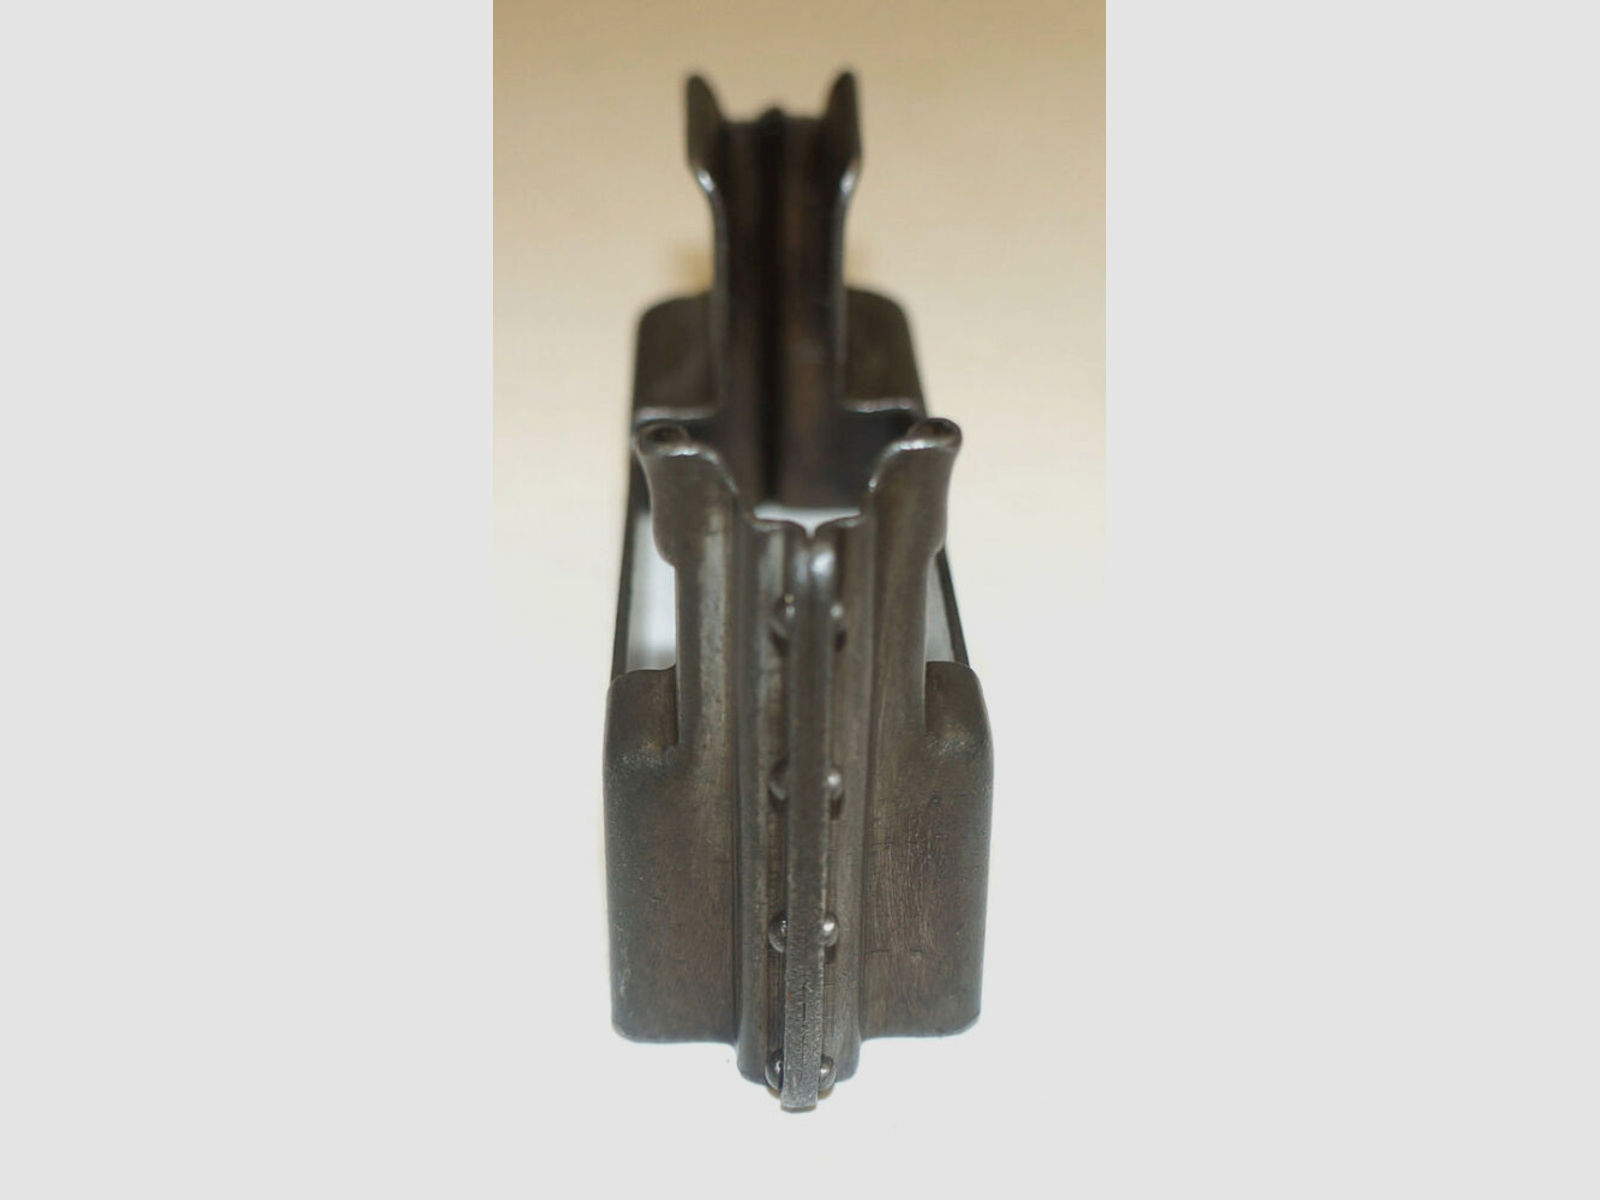 Browning	 Magazinlader BAR (Browning Automatic Rifle,MG,Maschinen.) M1918, M1918A1, M1918A2 Kal. .30-06Spring.